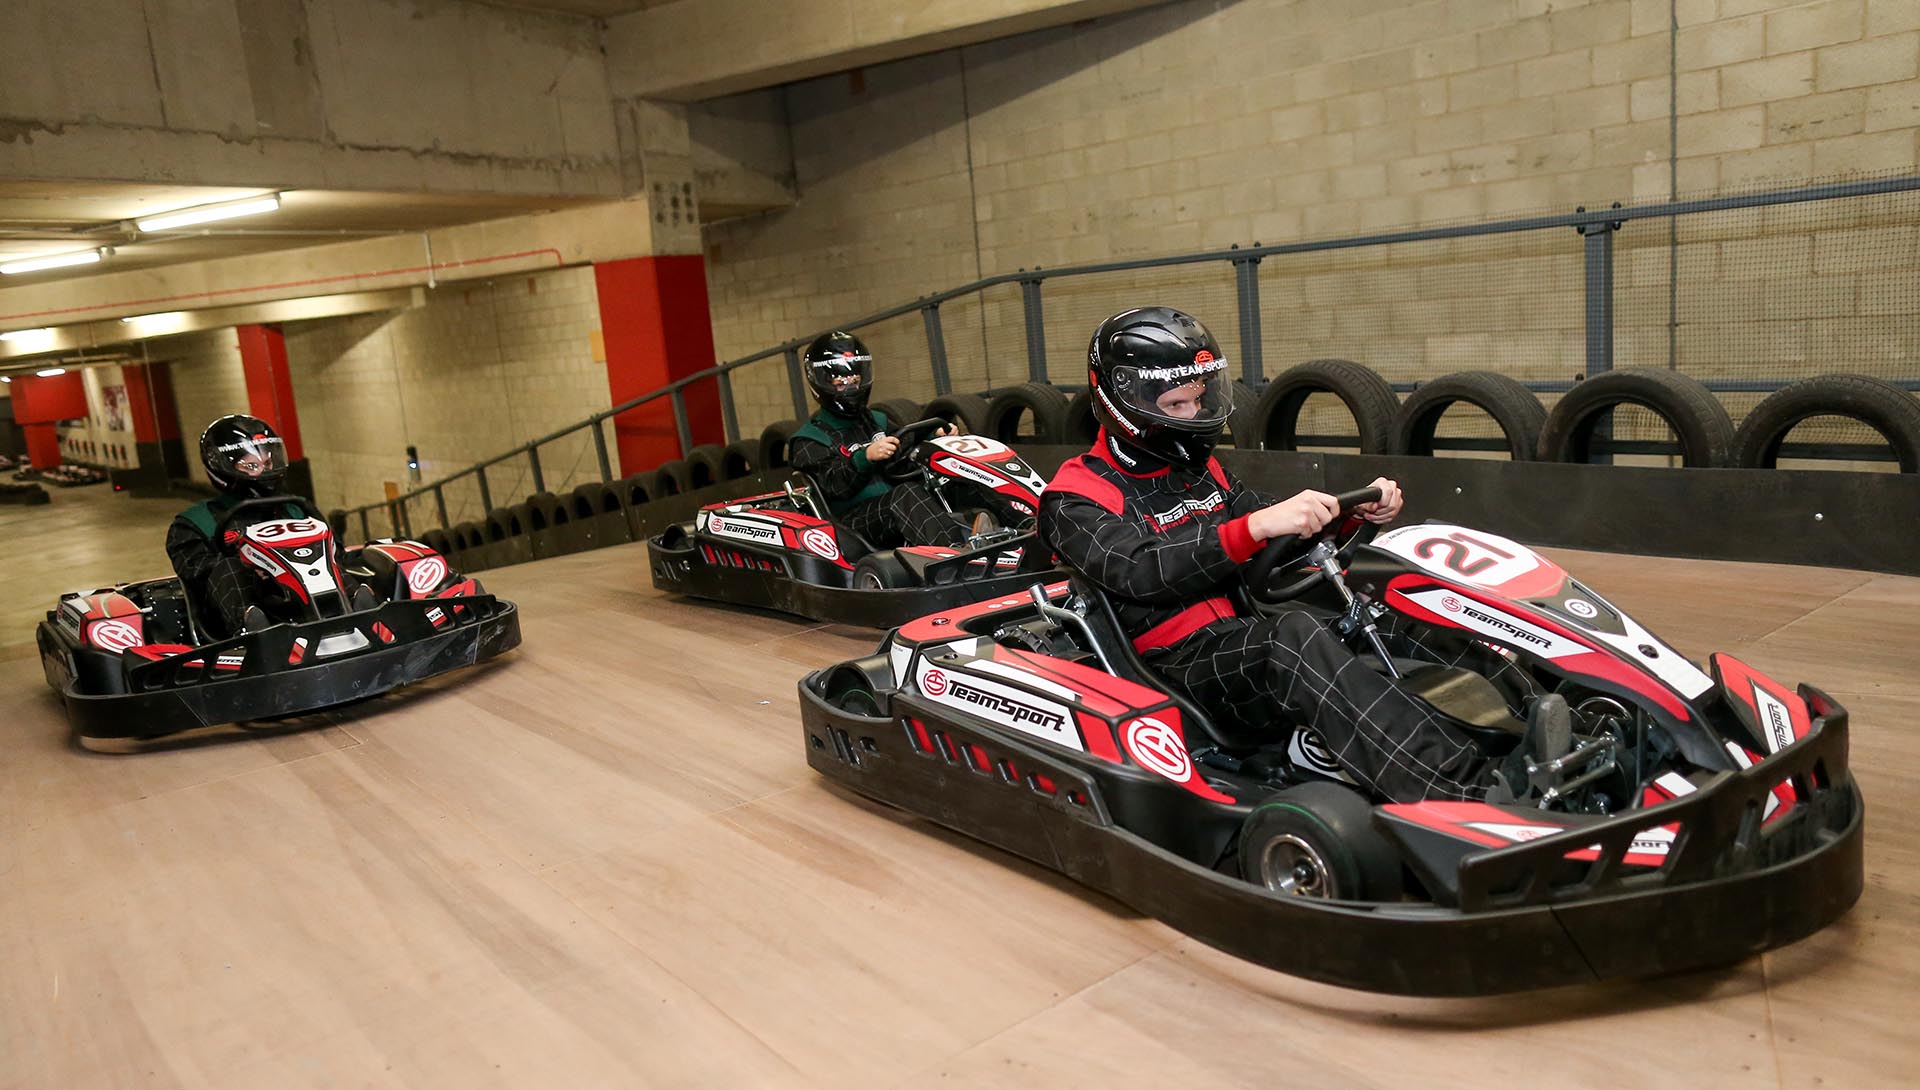 TeamSport Go Karting Manchester Victoria in United Kingdom, Europe | Karting - Rated 4.1